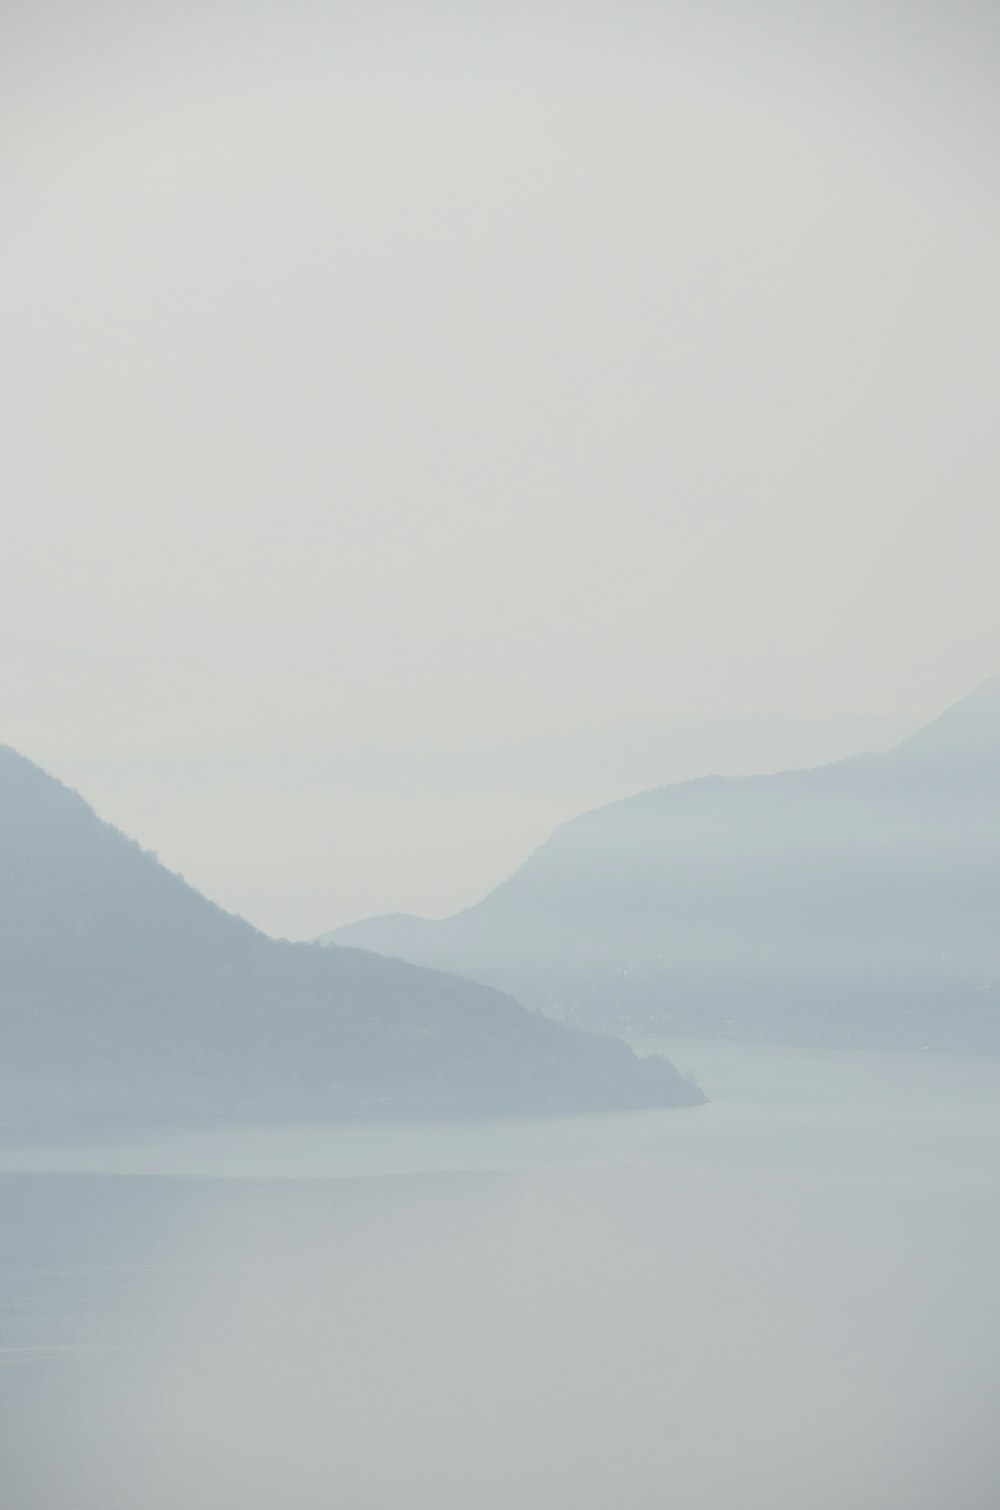 a foggy day over a lake with mountains in the distance